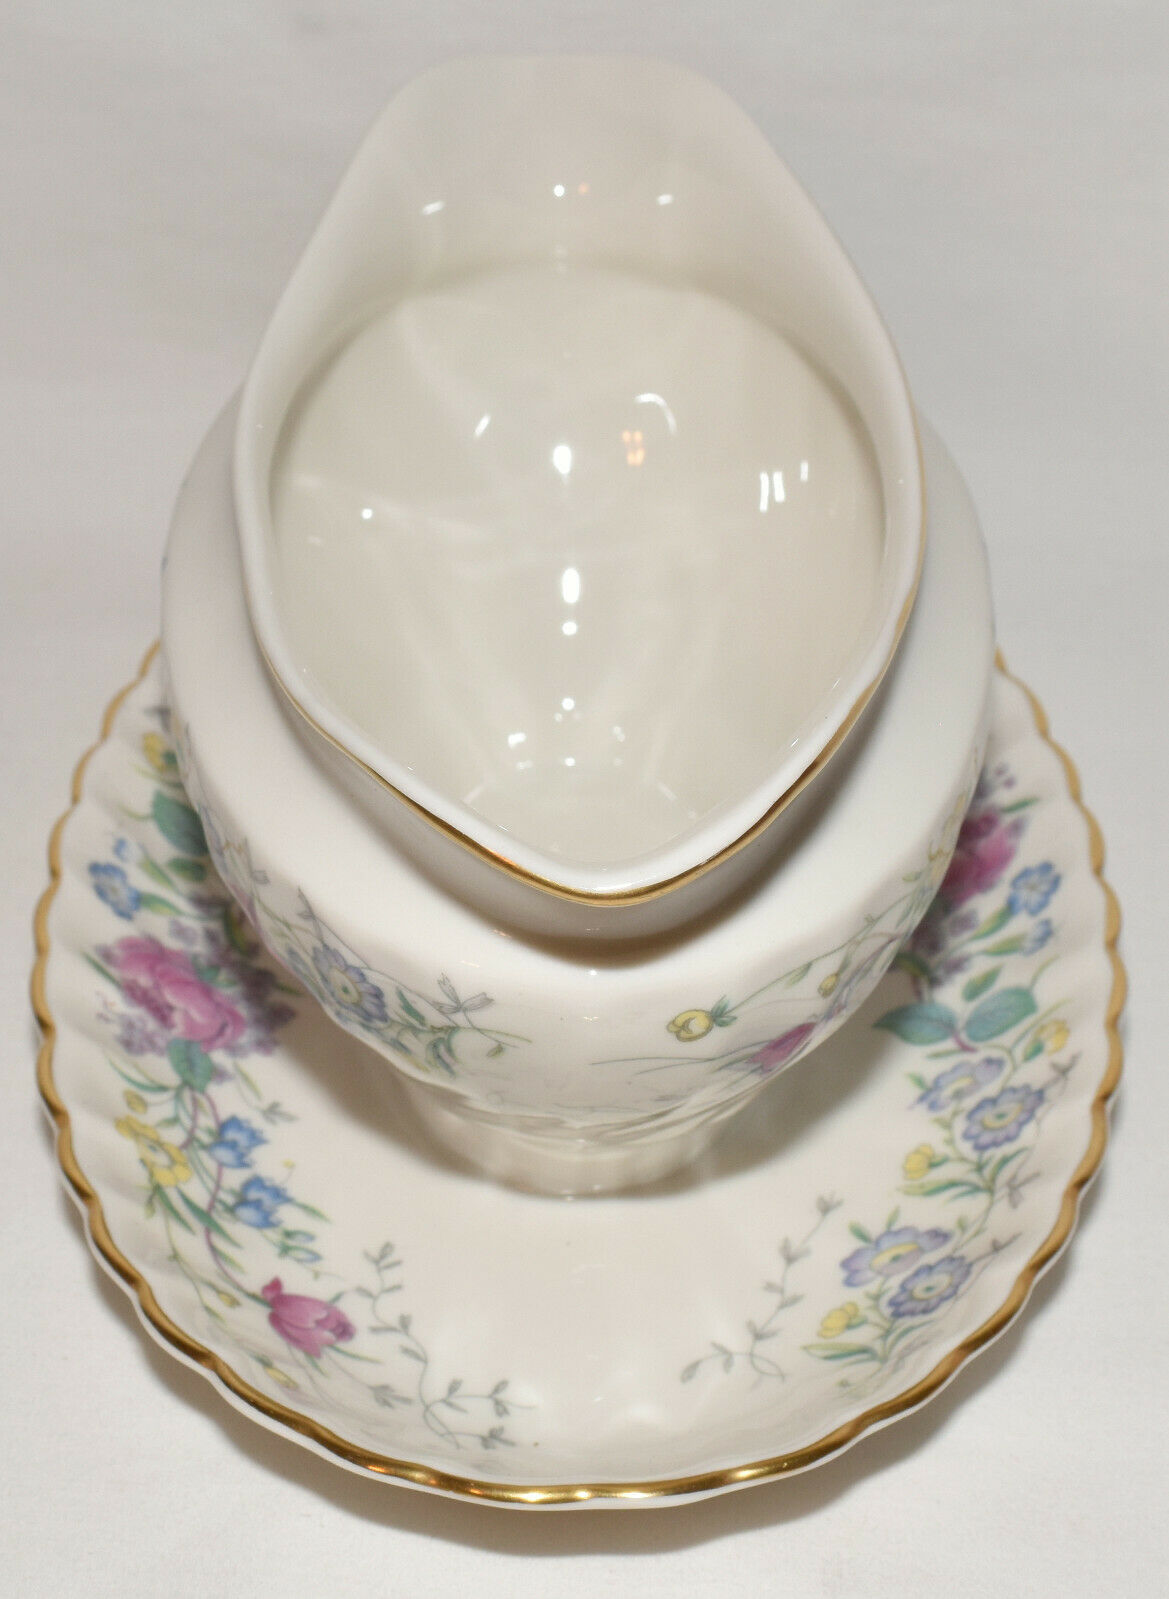 Syracuse China Lilac Rose 14" Serving Platter & Gravy Boat Made in America Mint